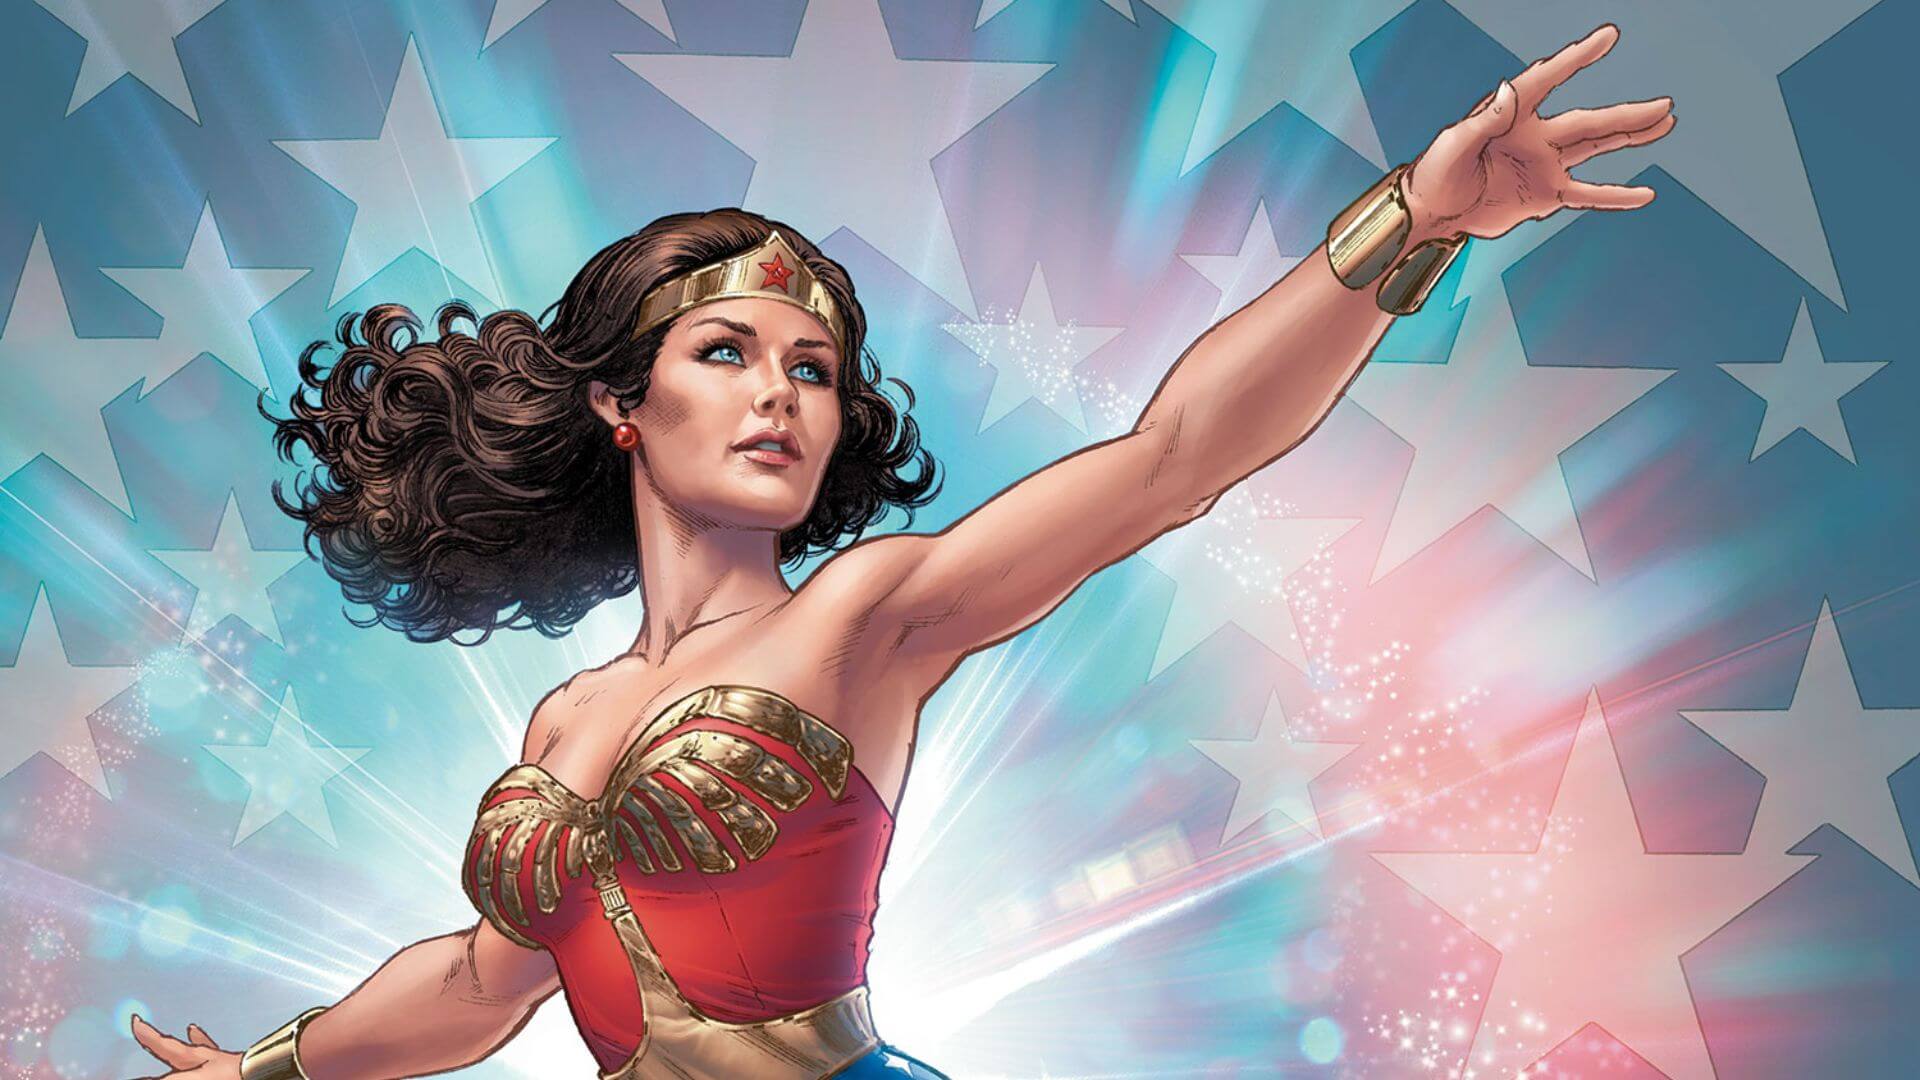 Wonder Woman as the perfect queer character 